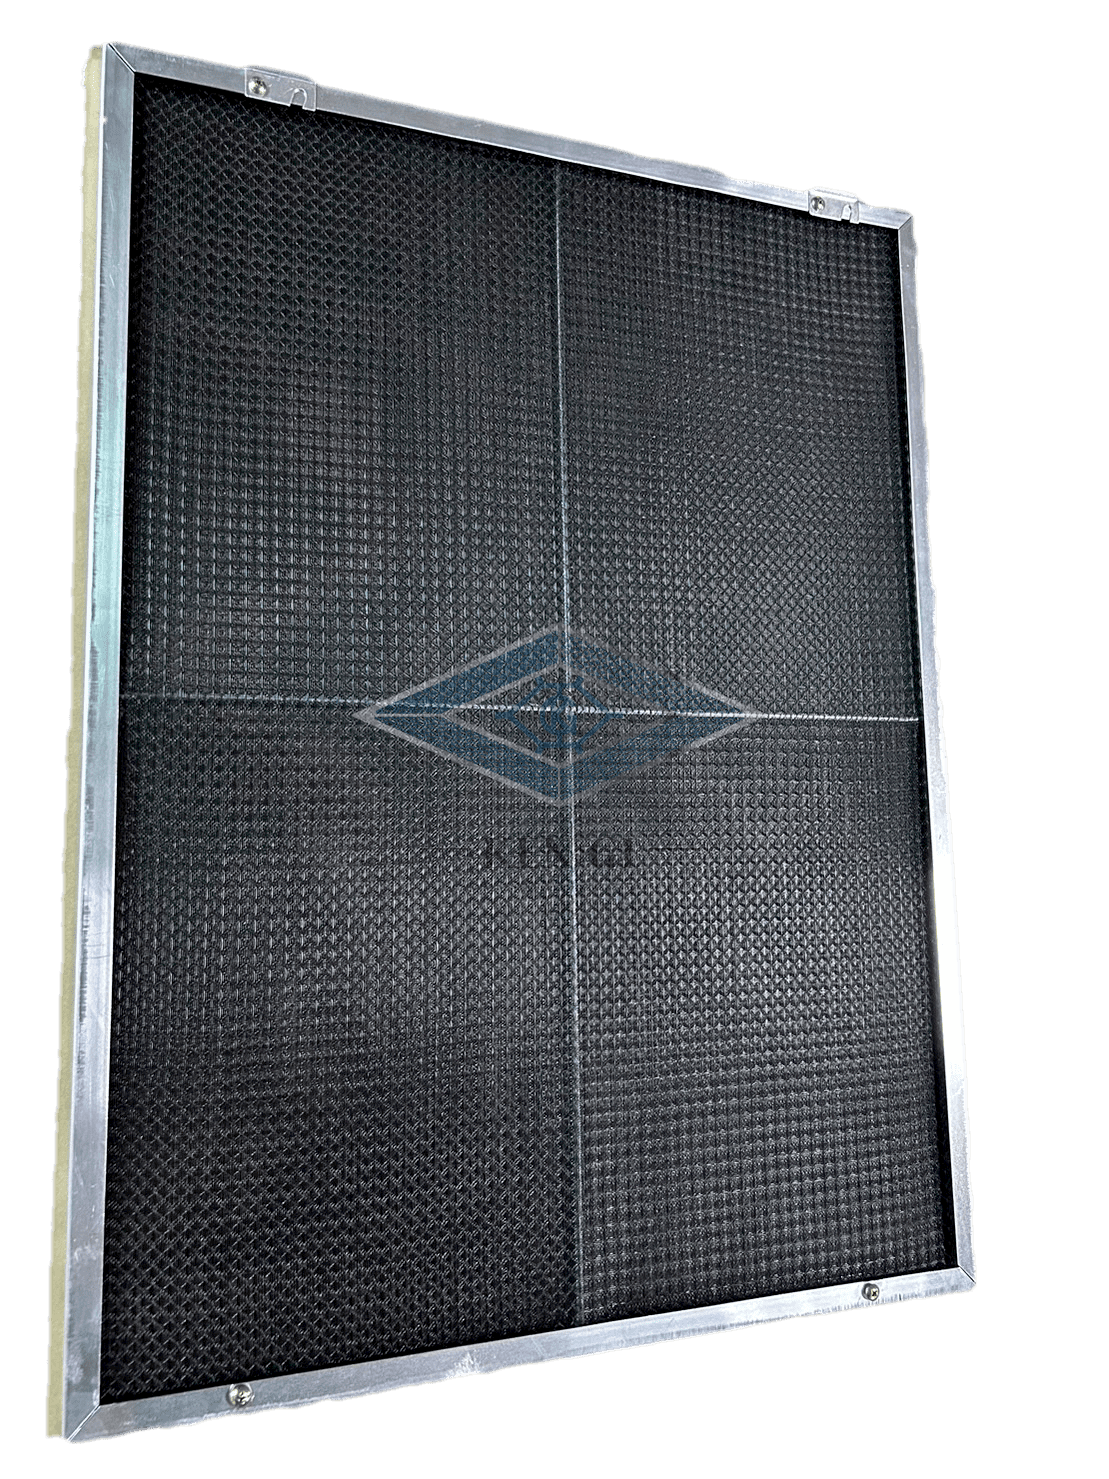 Metal frame + PE, PP filter screen can adapt to harsh industrial environment with durability and corrosion resistance.